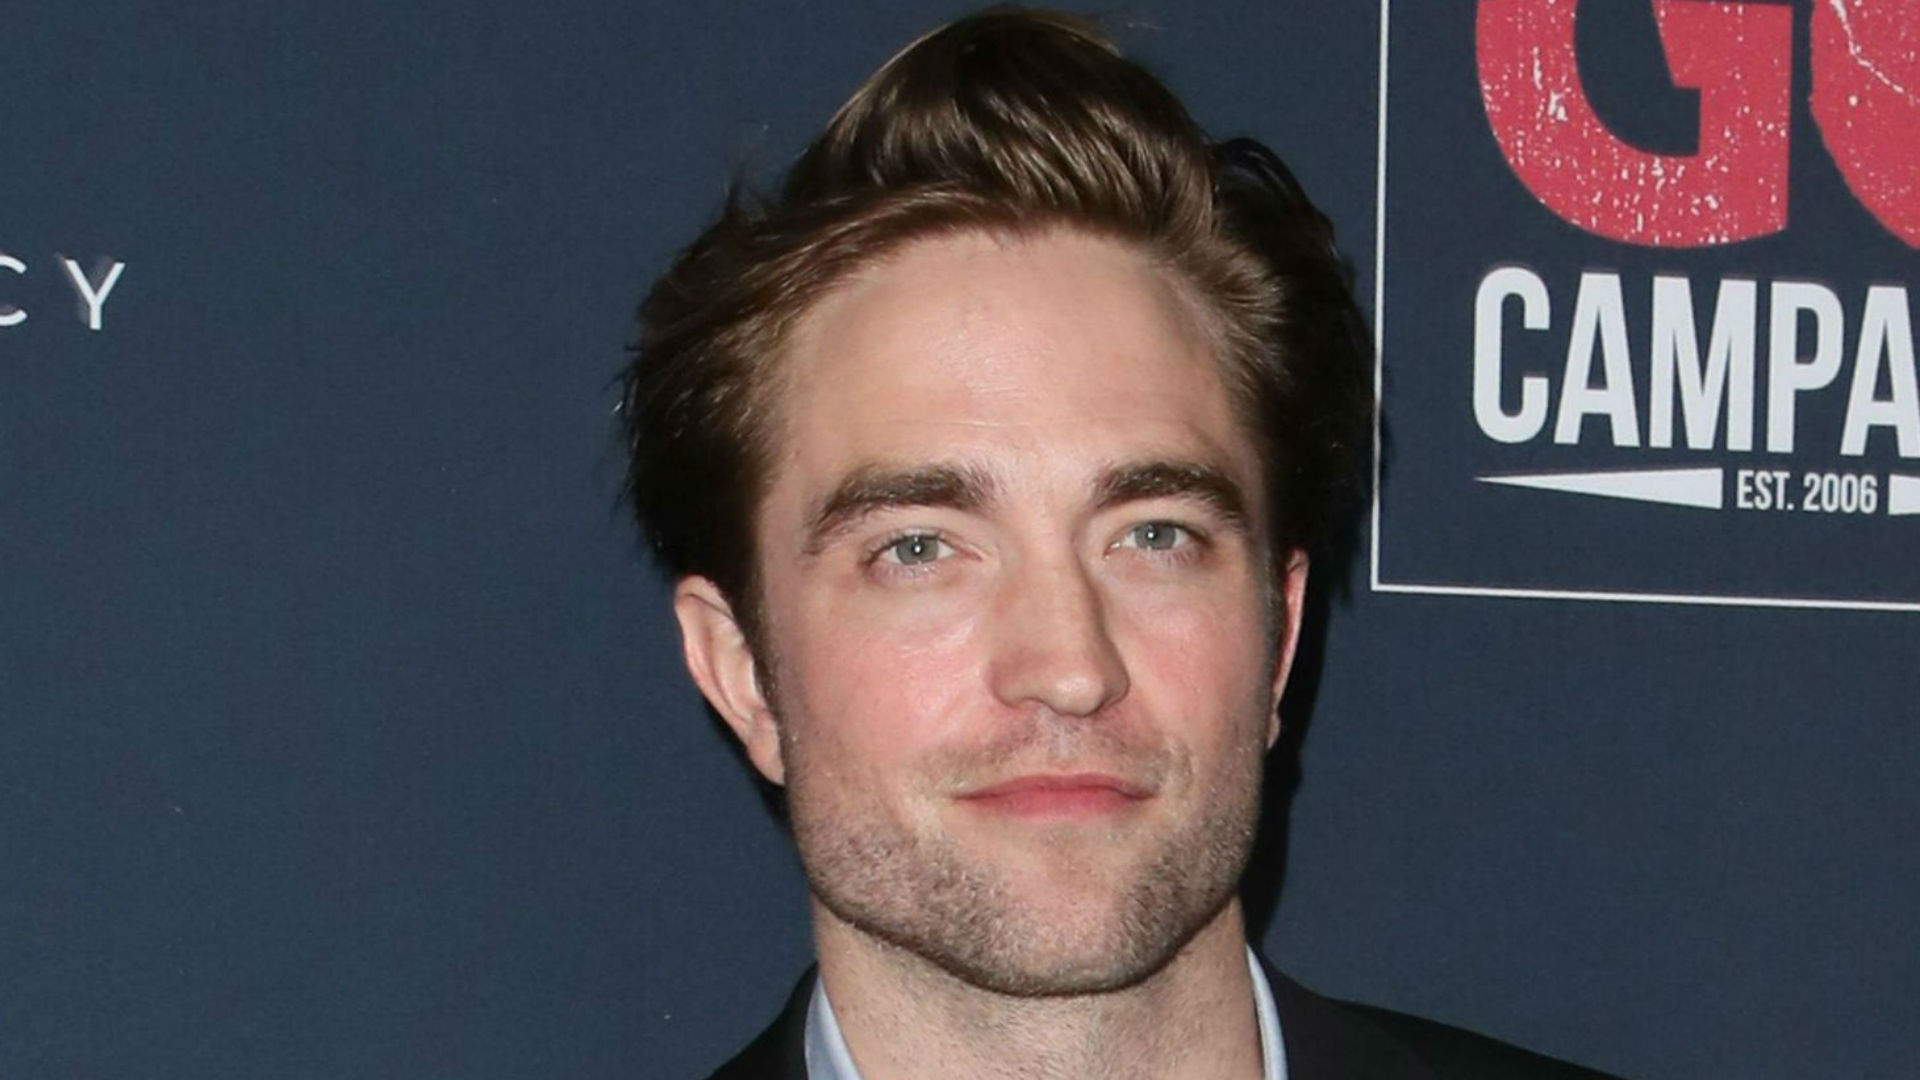 10 Things You Never Knew About Robert Pattinson